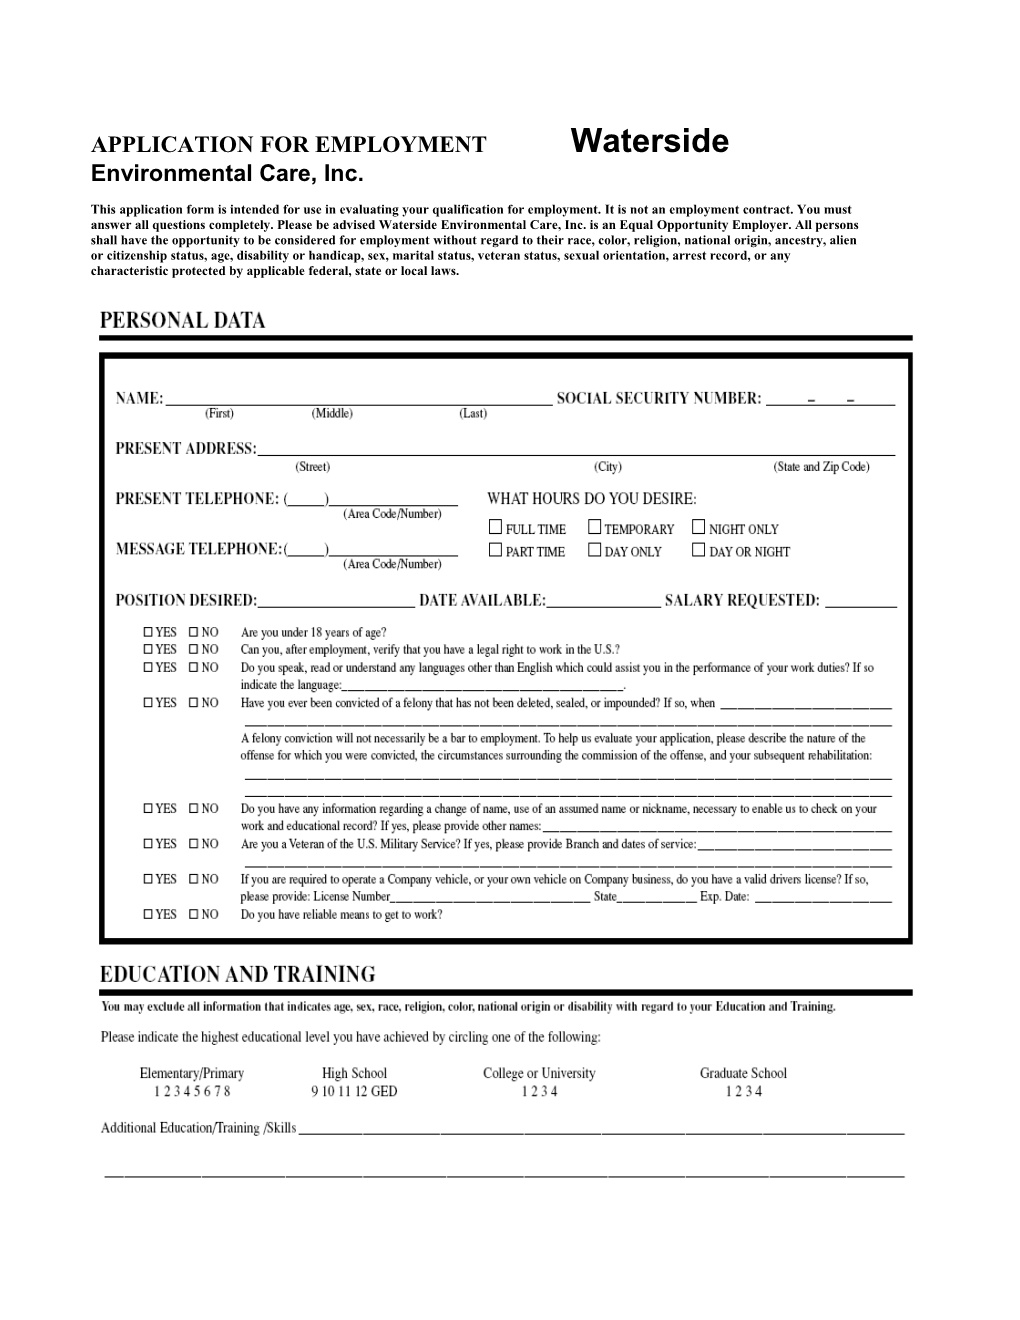 APPLICATION for Employmentwaterside